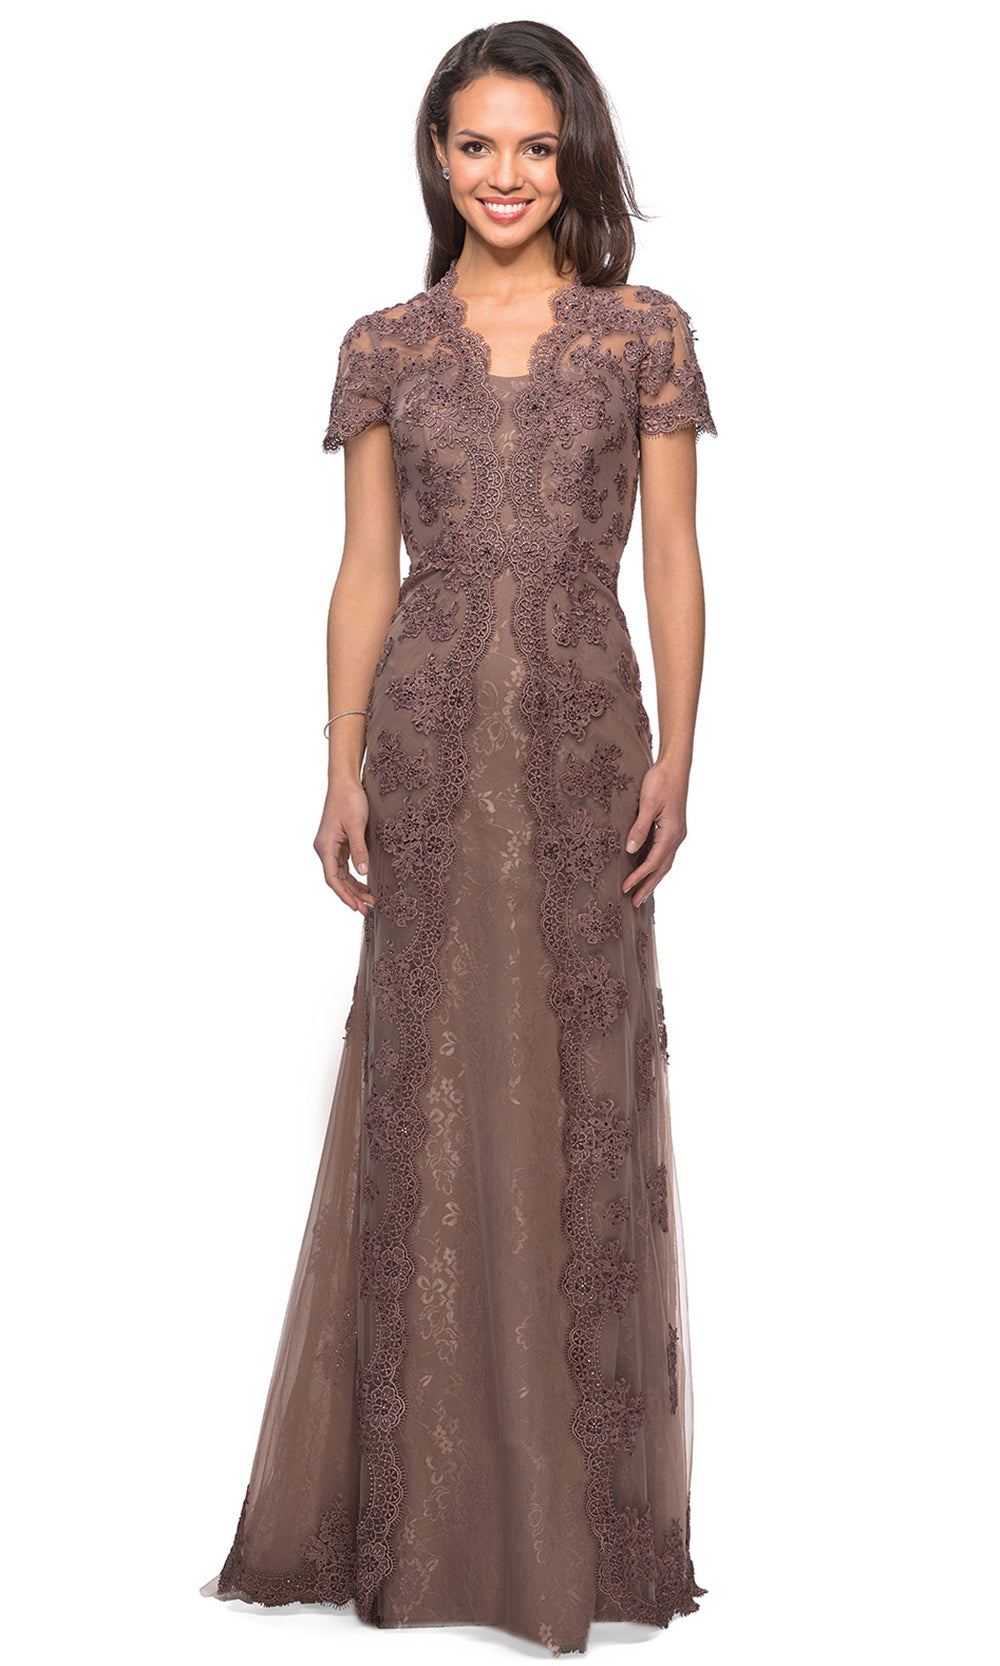 La Femme - 28195 Short Sleeve Embroidered Scallop Lace Dress In Brown